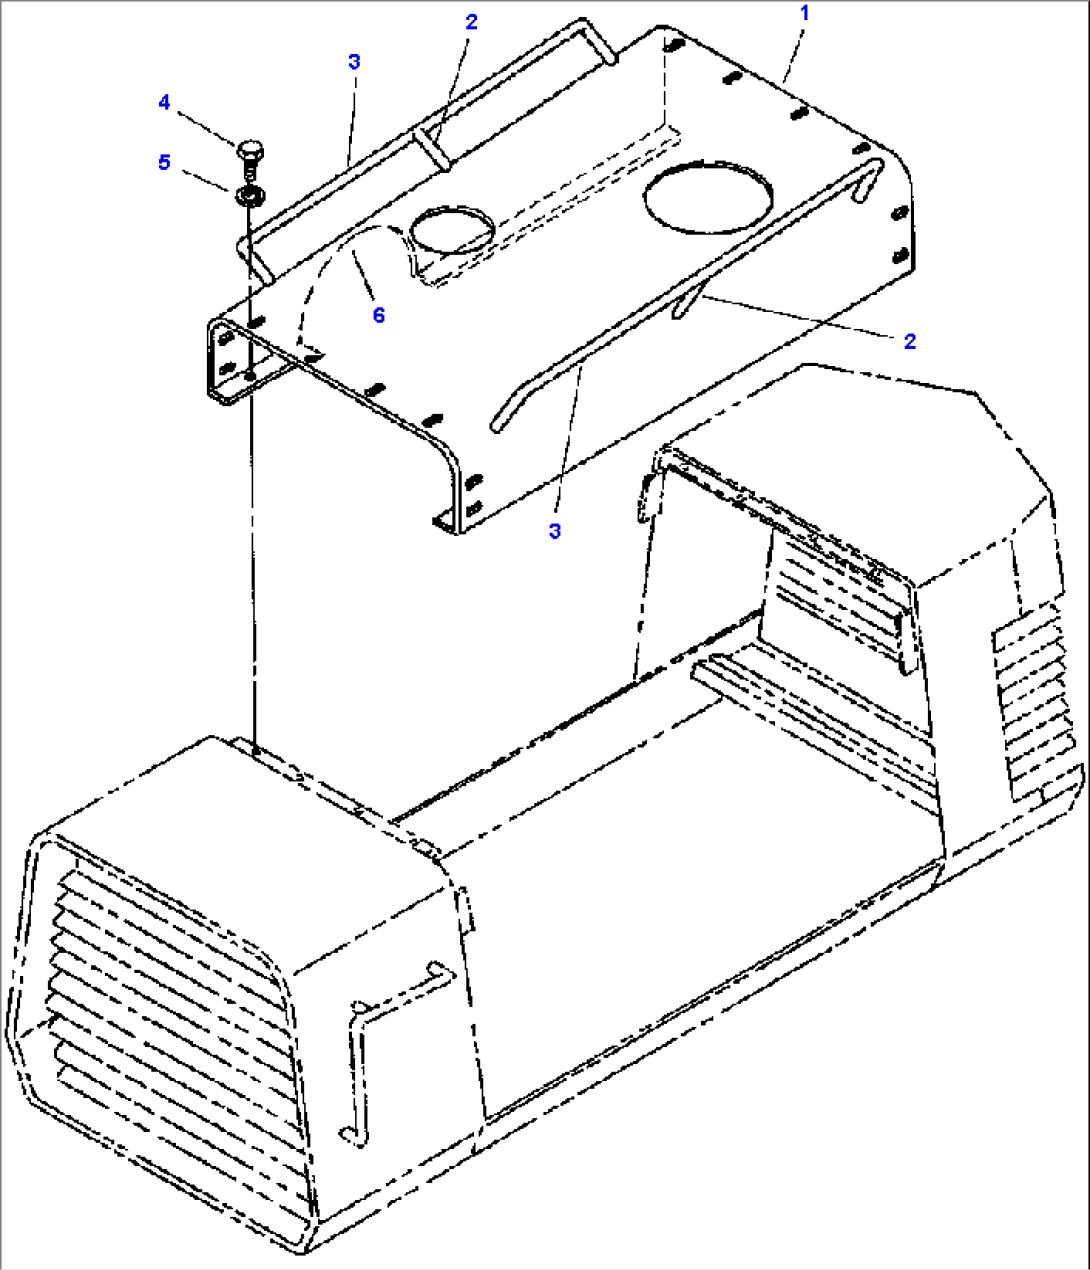 FIG. M5110-01A1 HOOD TOP - S/N 210568 AND UP